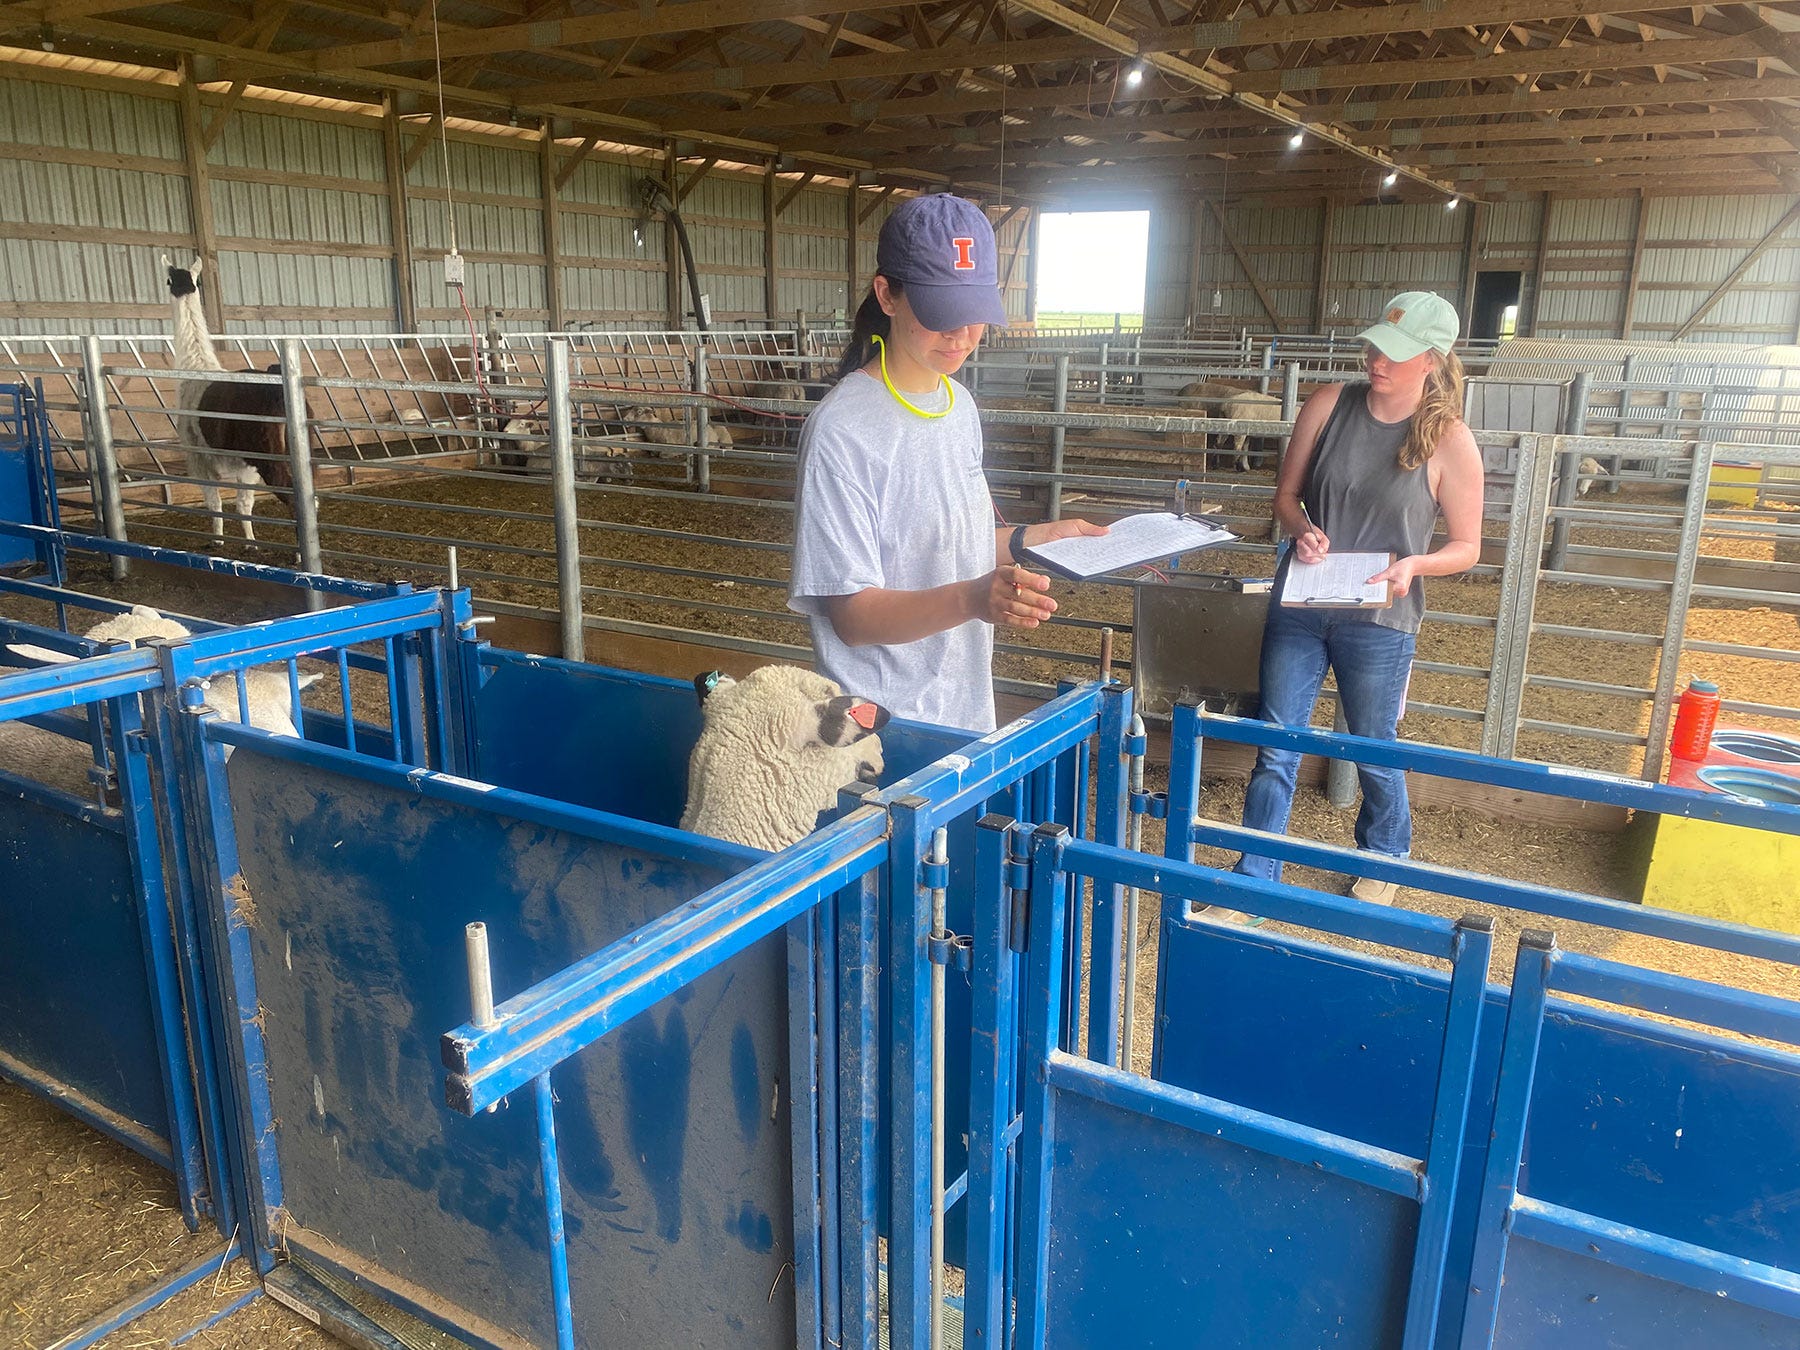 Emma Prybylski and Alyssa Brown holding clipboards near a stall with sheep